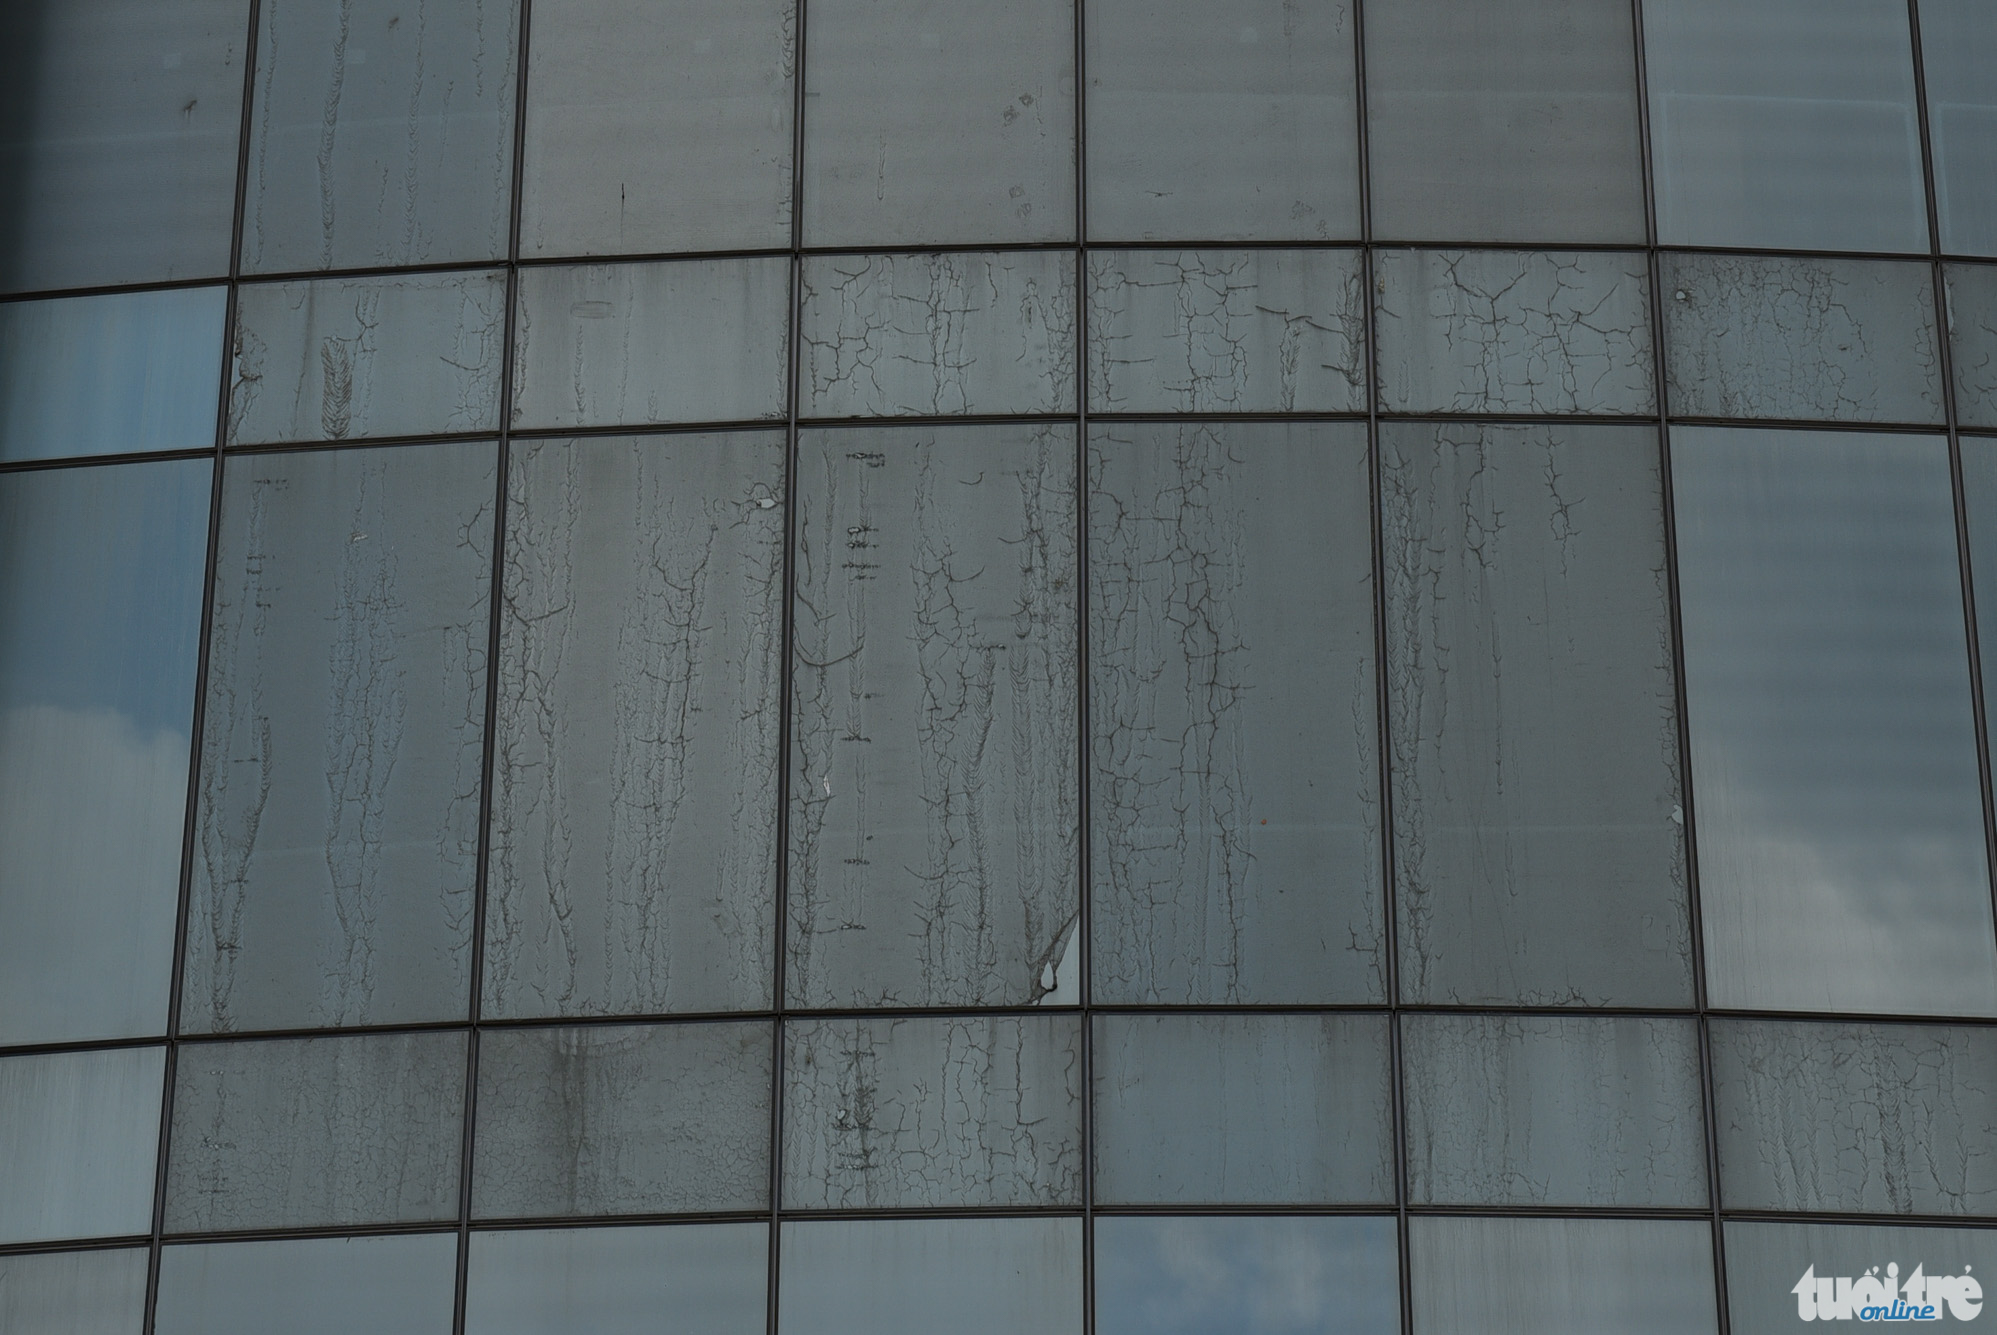 Dust covers the glass windows of the high-rise building.